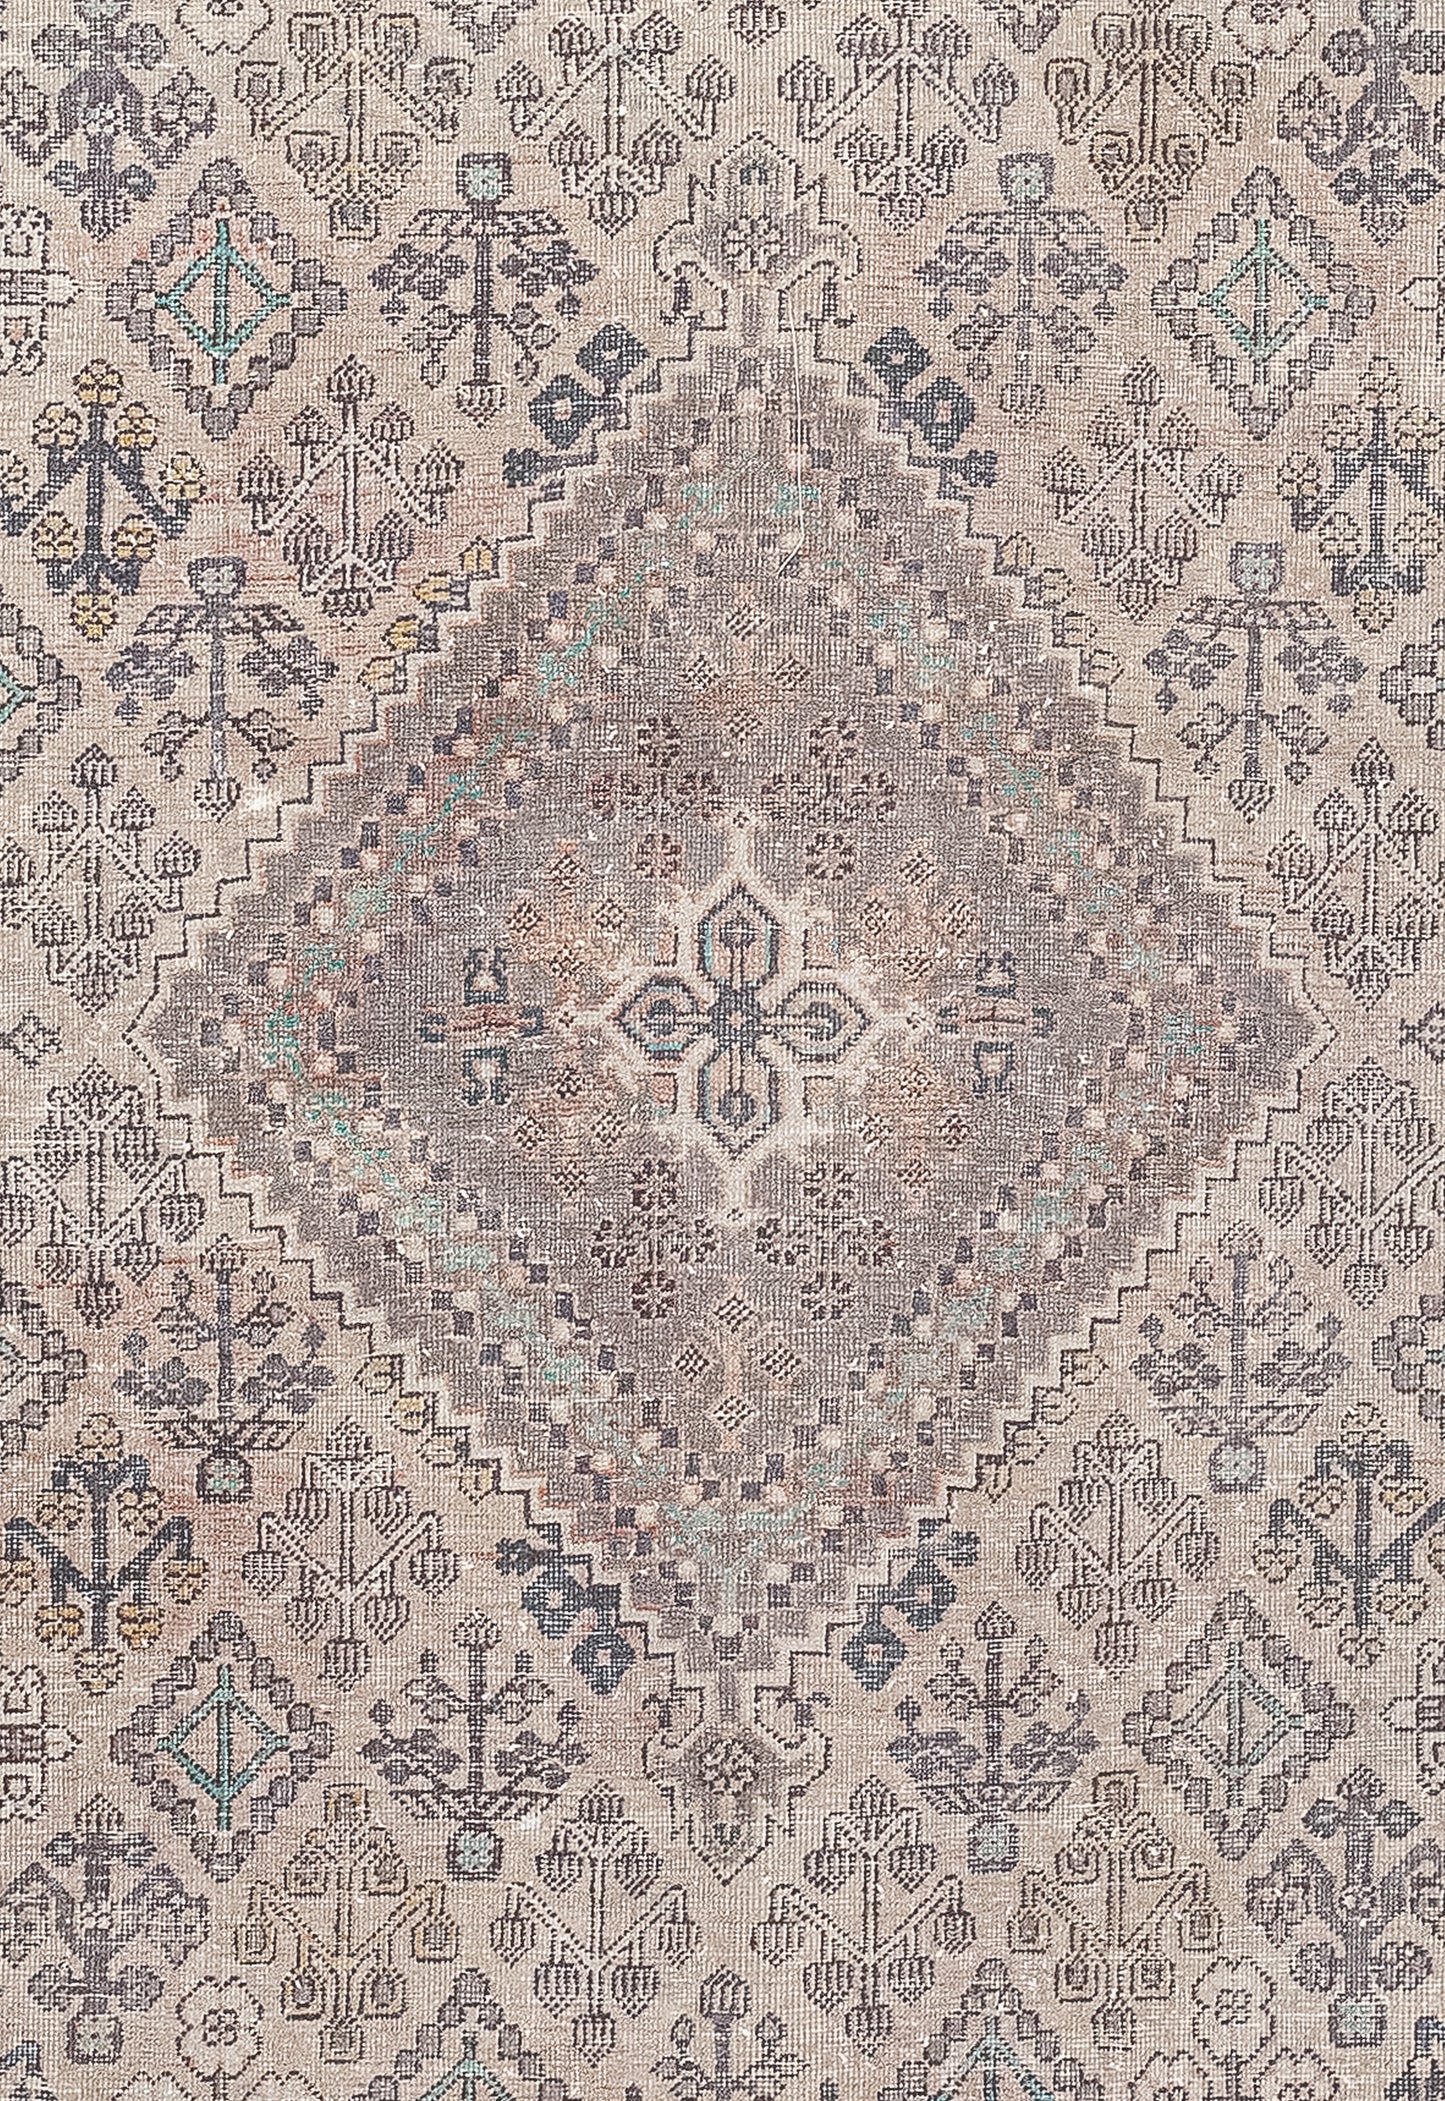 The foreground of the rug has a large diamond shape filled with small rhombuses and a central square cross that has pointed vertices. Additionally, the central main illustration is surrounded by smaller diamond shapes containing different styles of chandelier.